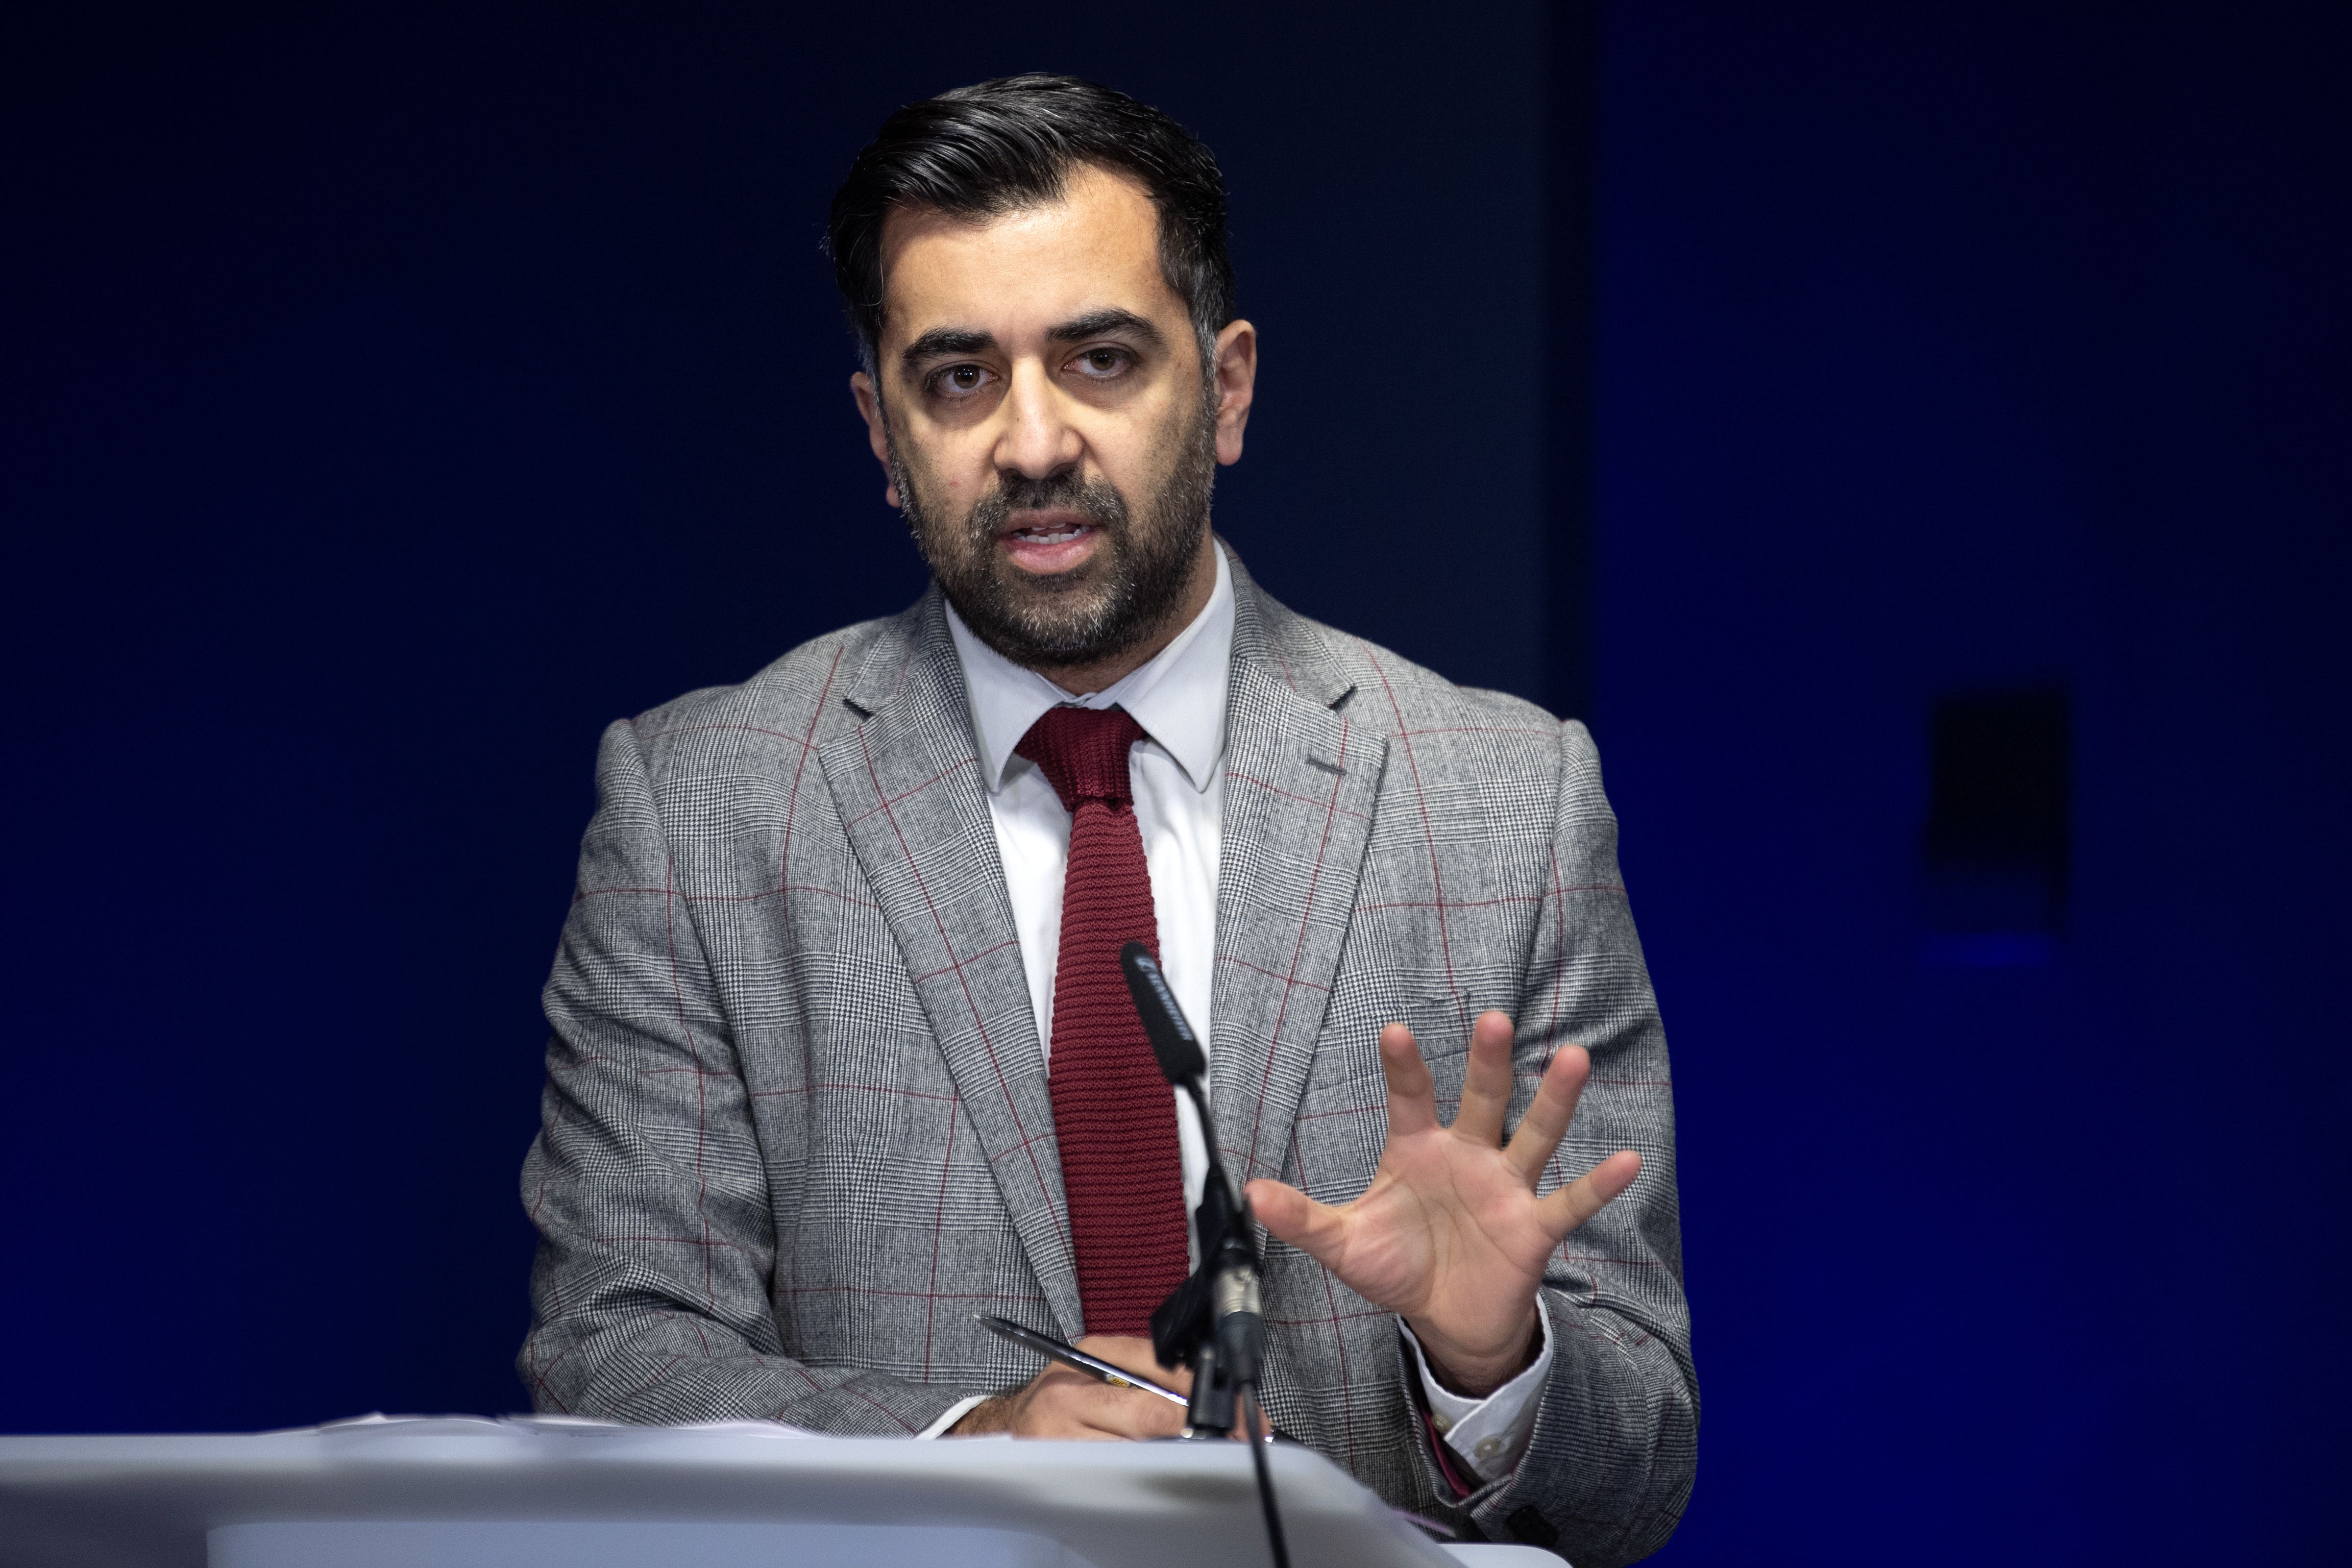 Humza Yousaf to run for SNP leader, reports say | The Independent